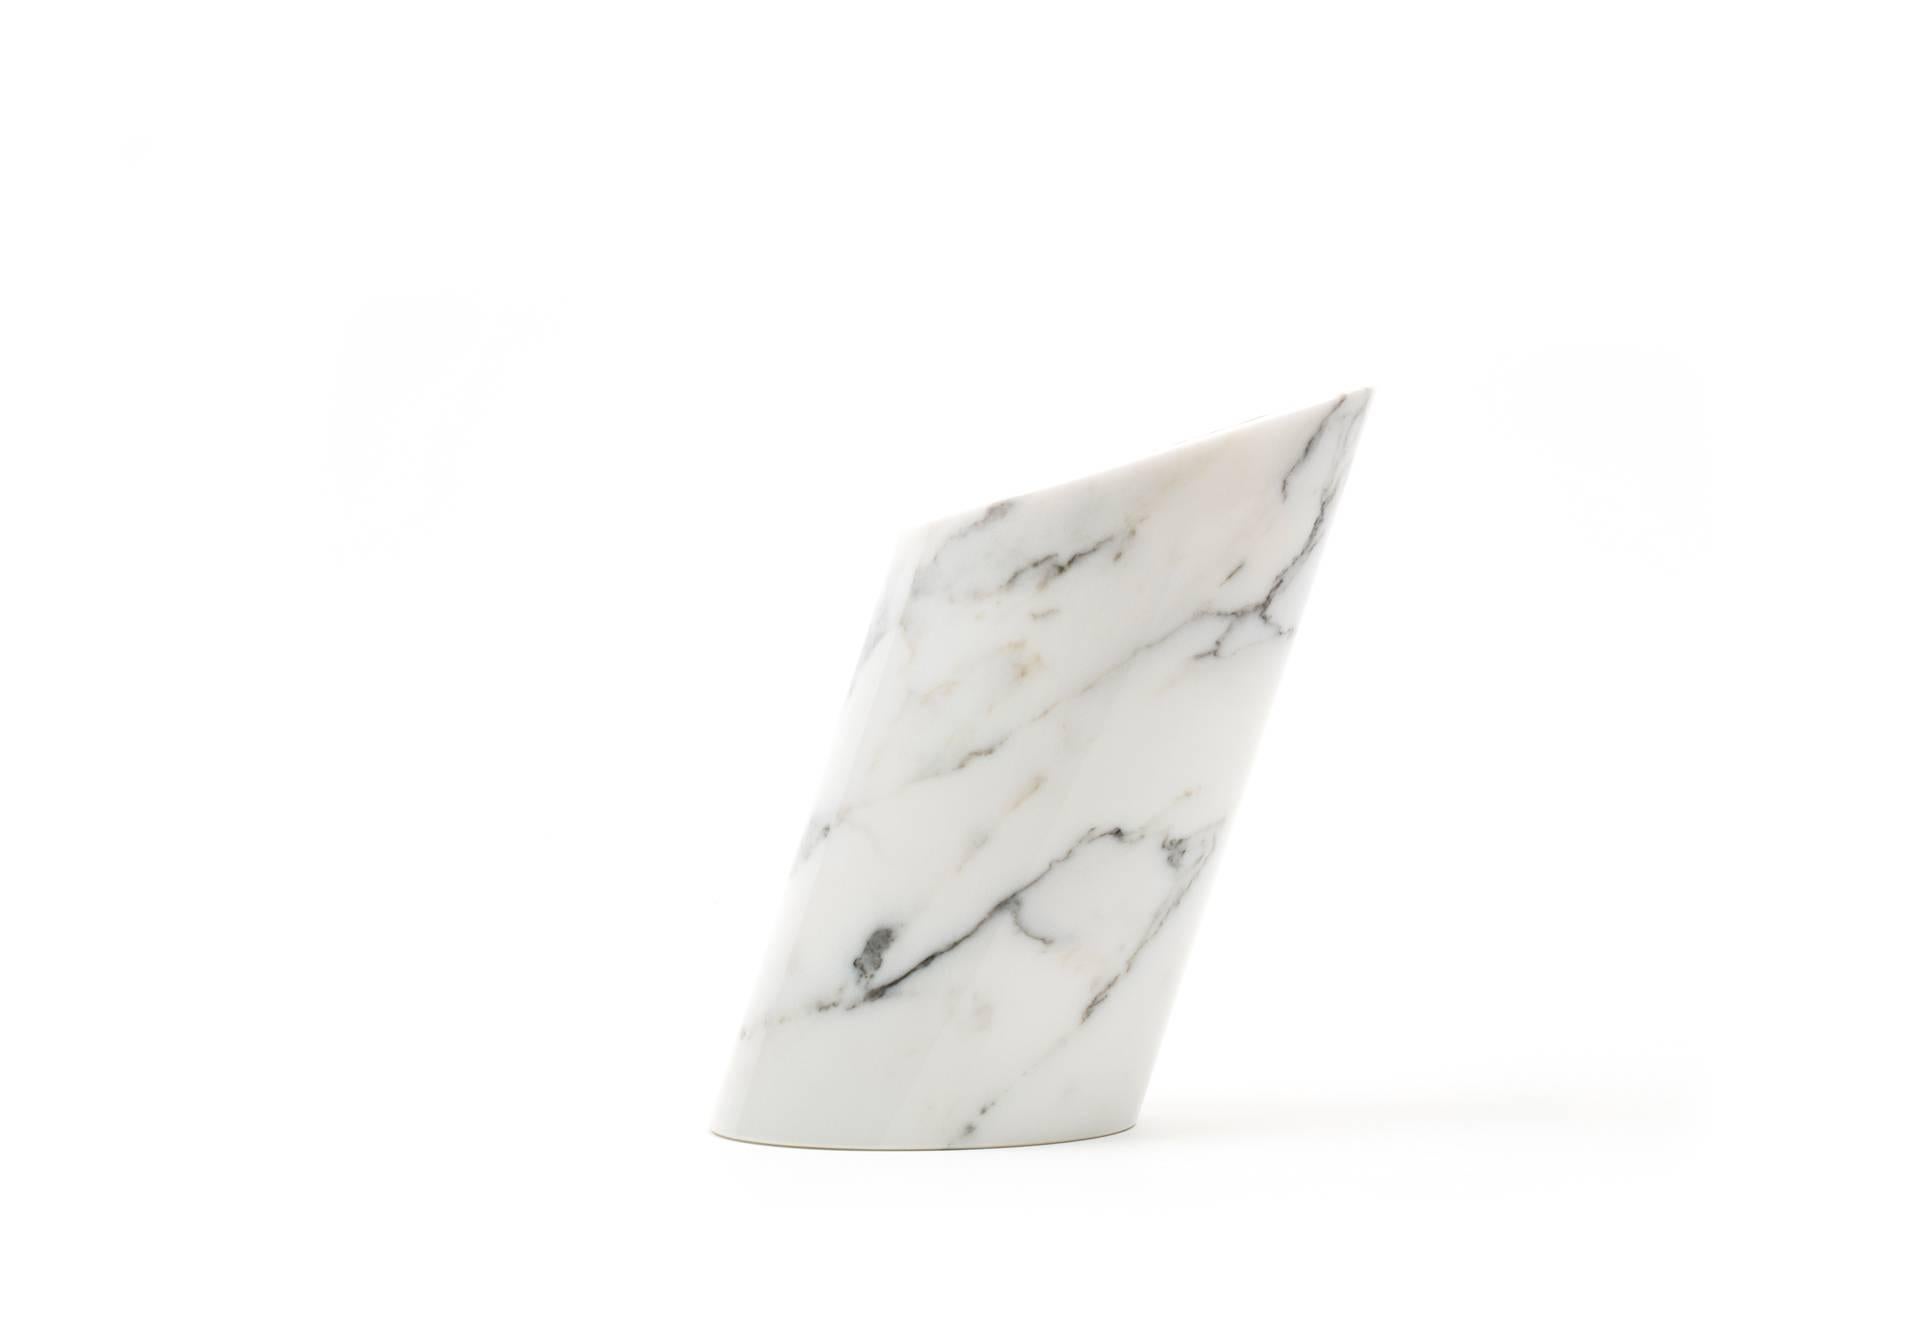 White Carrara marble bottle holder for wine bottles. Each piece is in a way unique (since each marble block is different in veins and shades) and handcrafted in Italy. Slight variations in shape, color and size are to be considered a guarantee of an